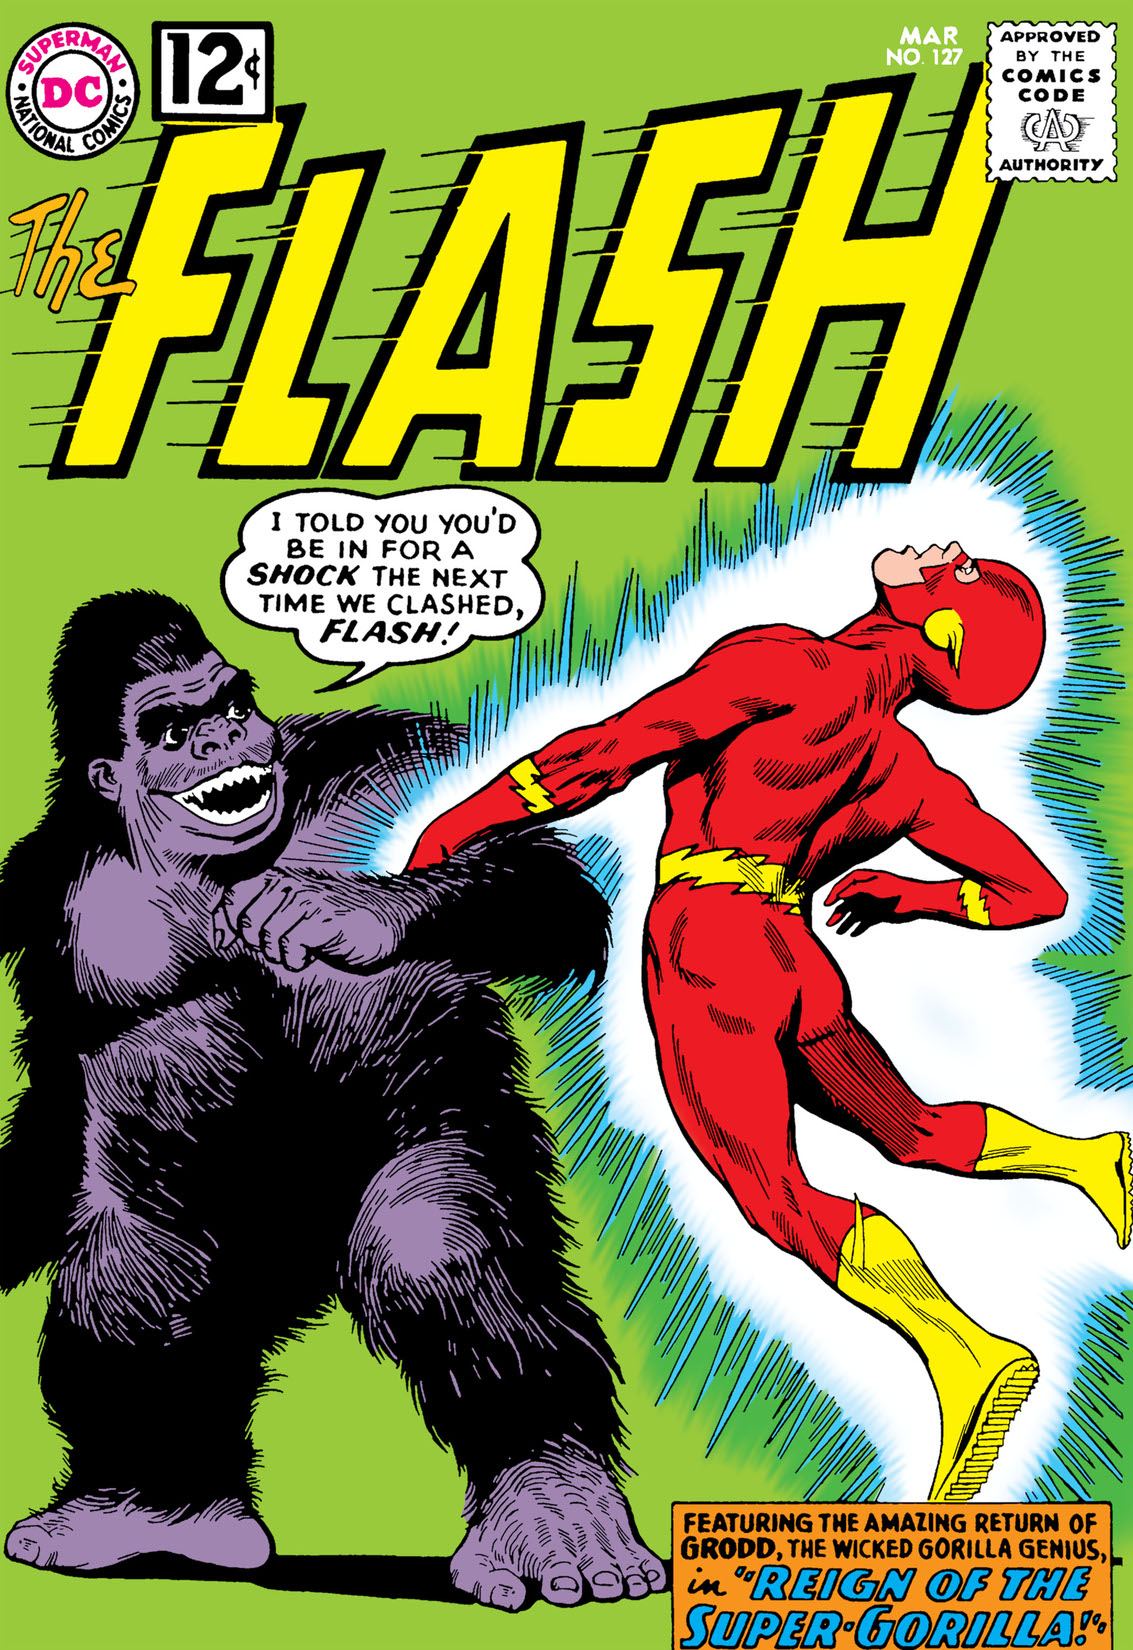 The Flash (1959-) #127 preview images